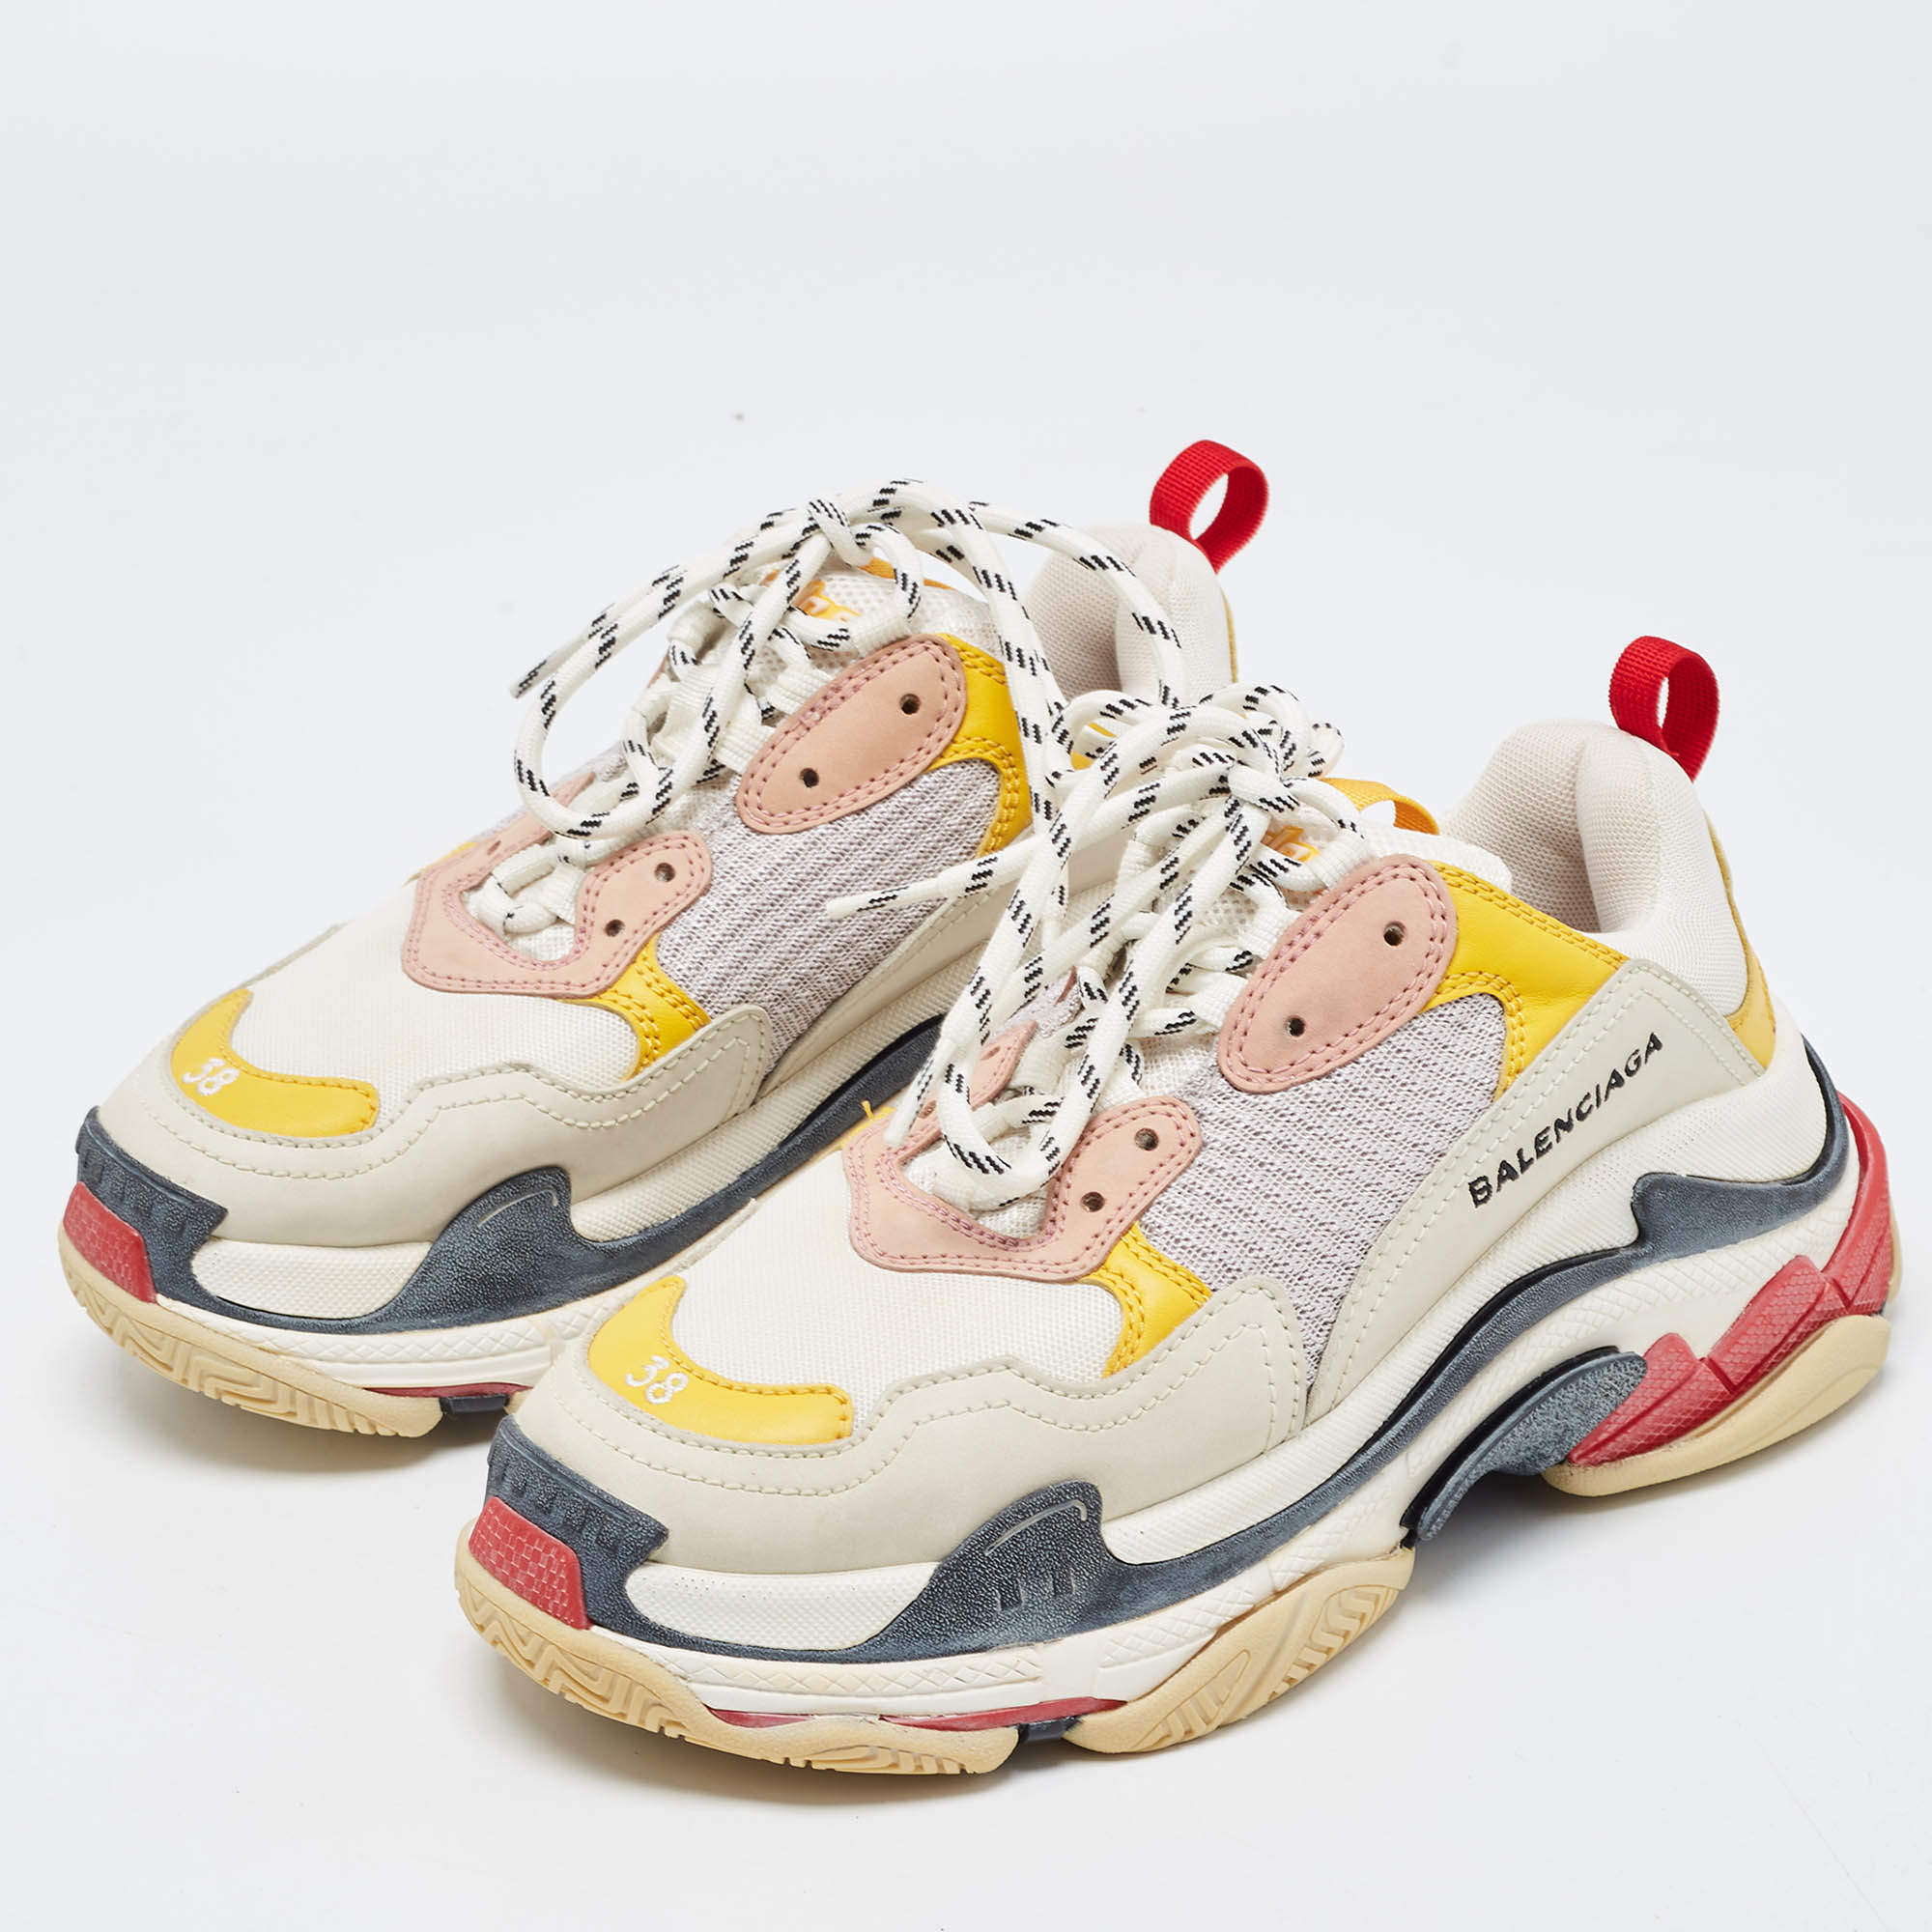 BALENCIAGA Triple S Multi-Panel Sneakers Red and Blue Size 38